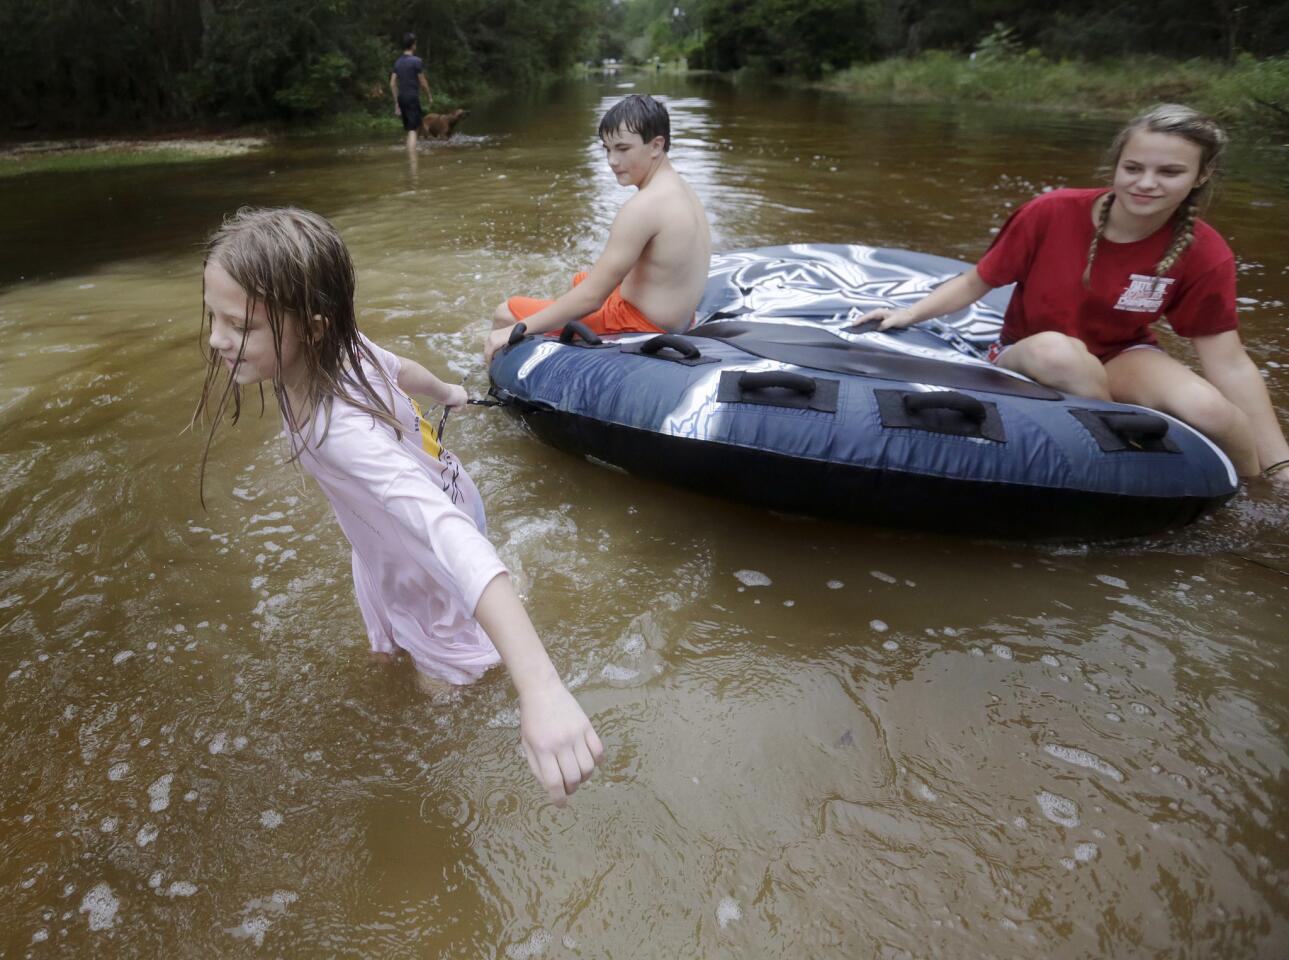 Crimson Peters, 7, left, Tracy Neilsen, 13, center, and Macee Nelson, 15, ride in an inner tube down a flooded street after Hurricane Nate on Oct. 8, 2017, in Coden, Ala.